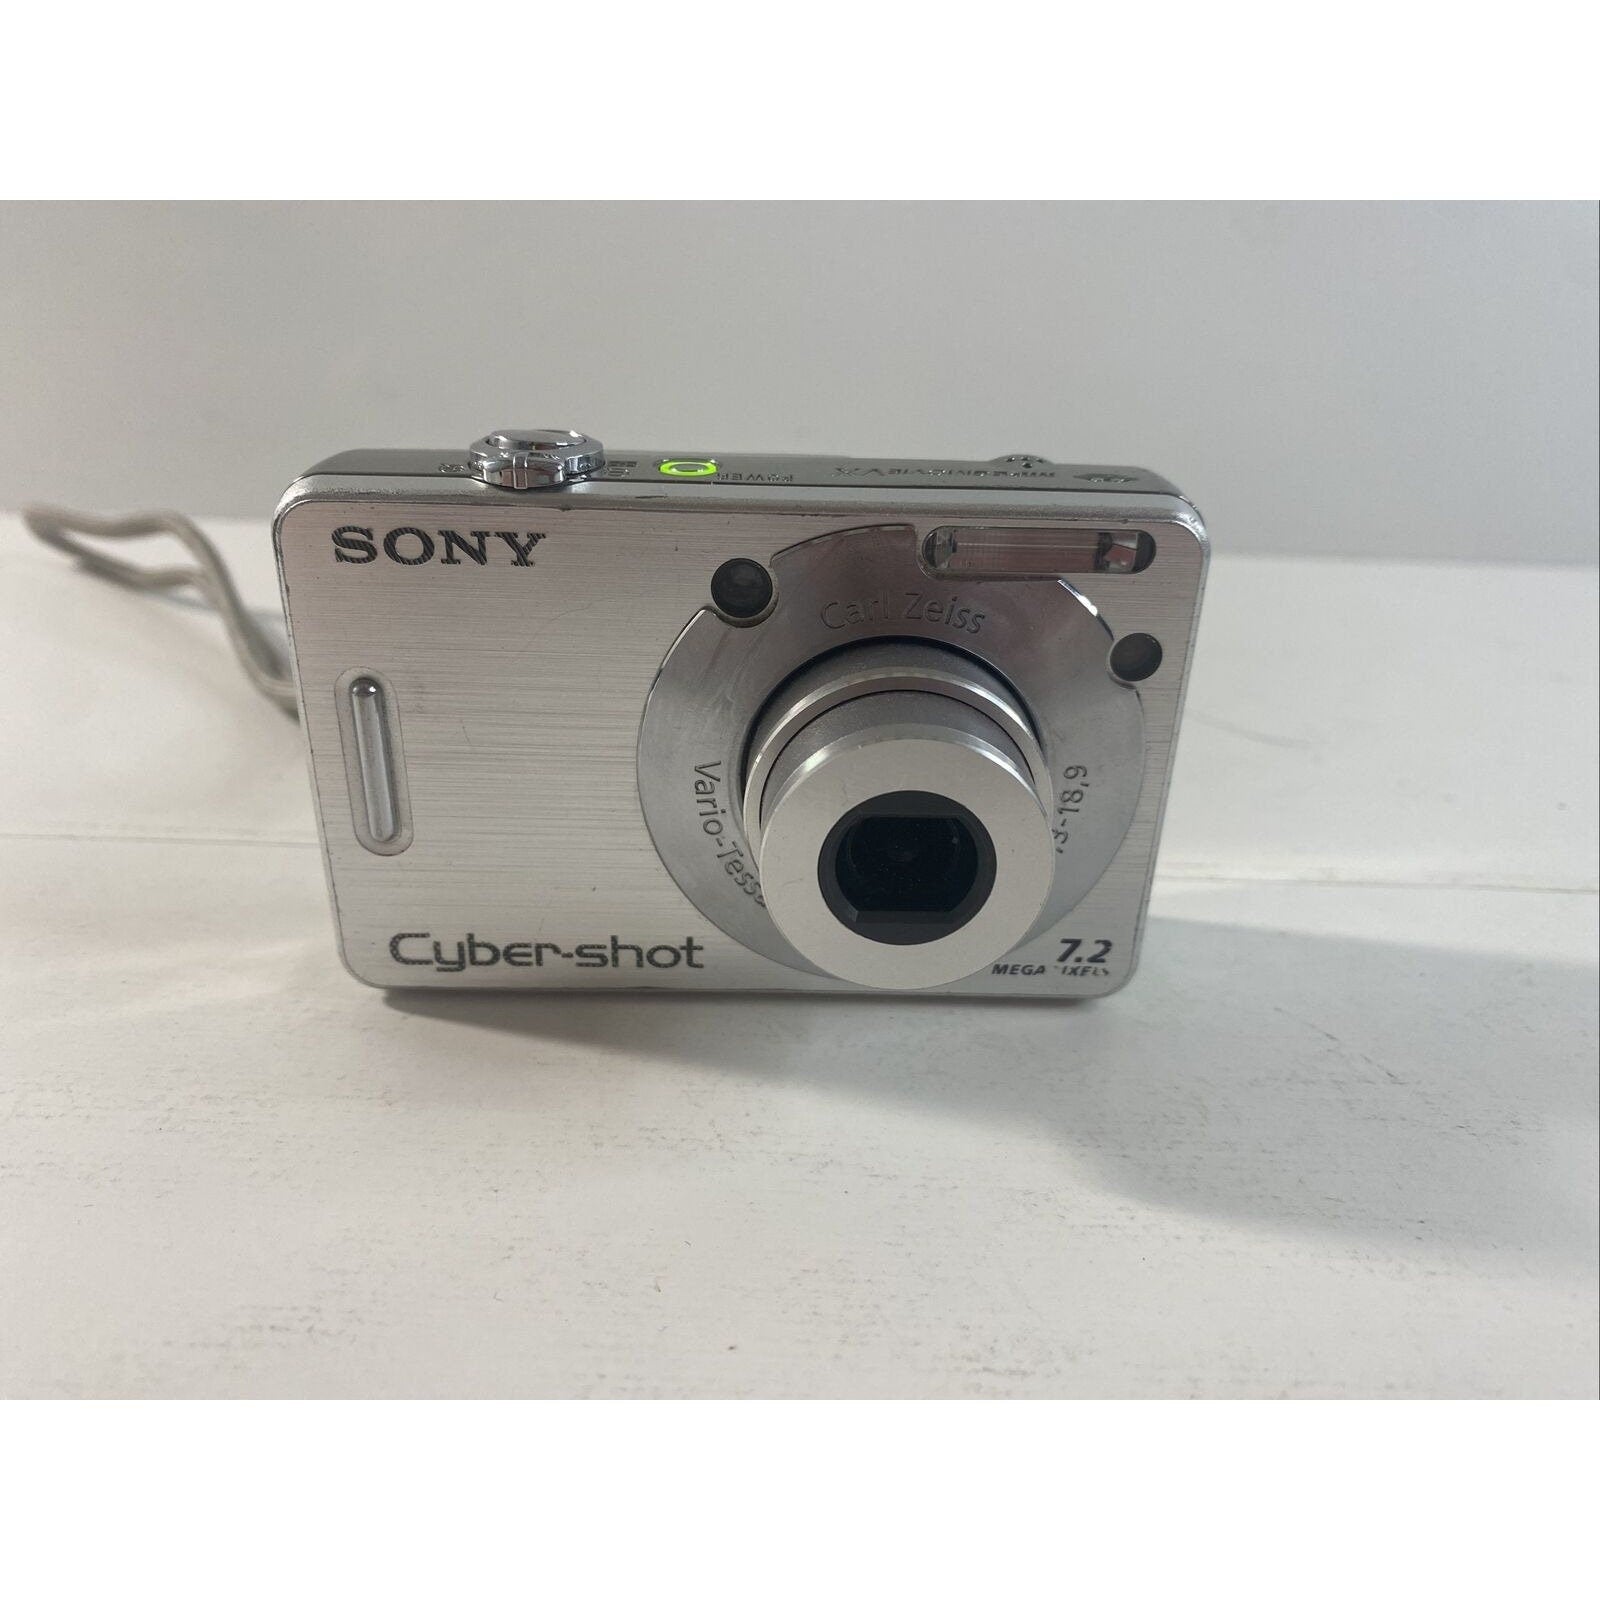 Sony Cybershot DSC-W70 Digital Camera - With Battery and charger